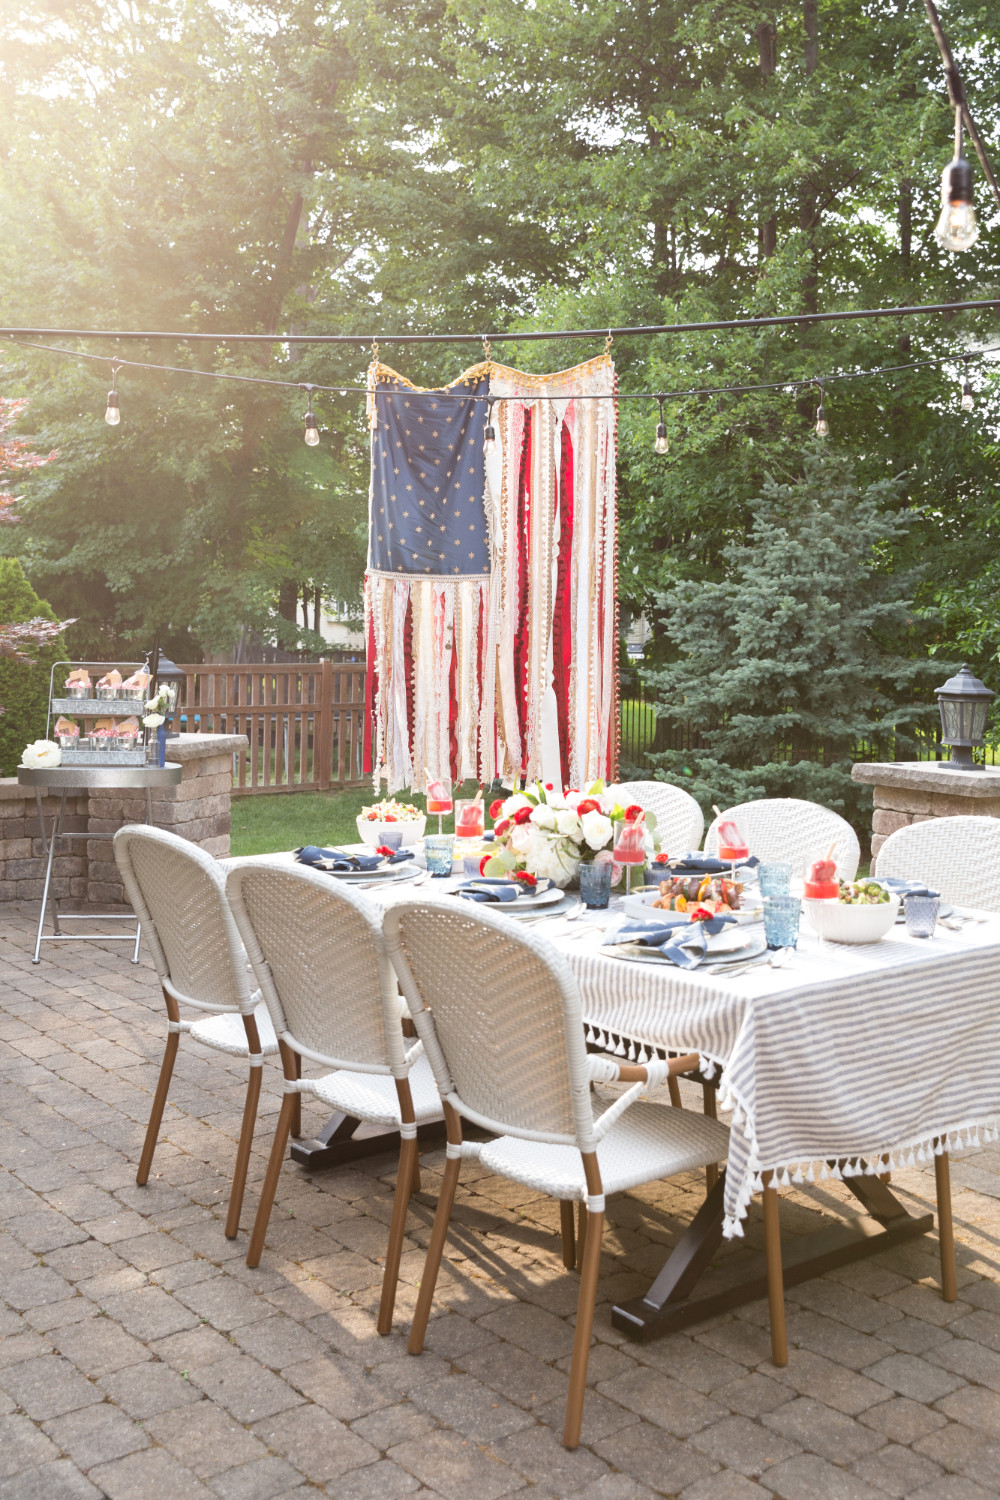 Top Creative Bridal Shower Theme Ideas. Red, White and Blue: Awesome and elegant patriotic decorations for a 4th of July theme bridal shower. // Ultimate chic Americana I Do BBQ party decor with a unique vintage ribbon American flag. // mysweetengagement.com